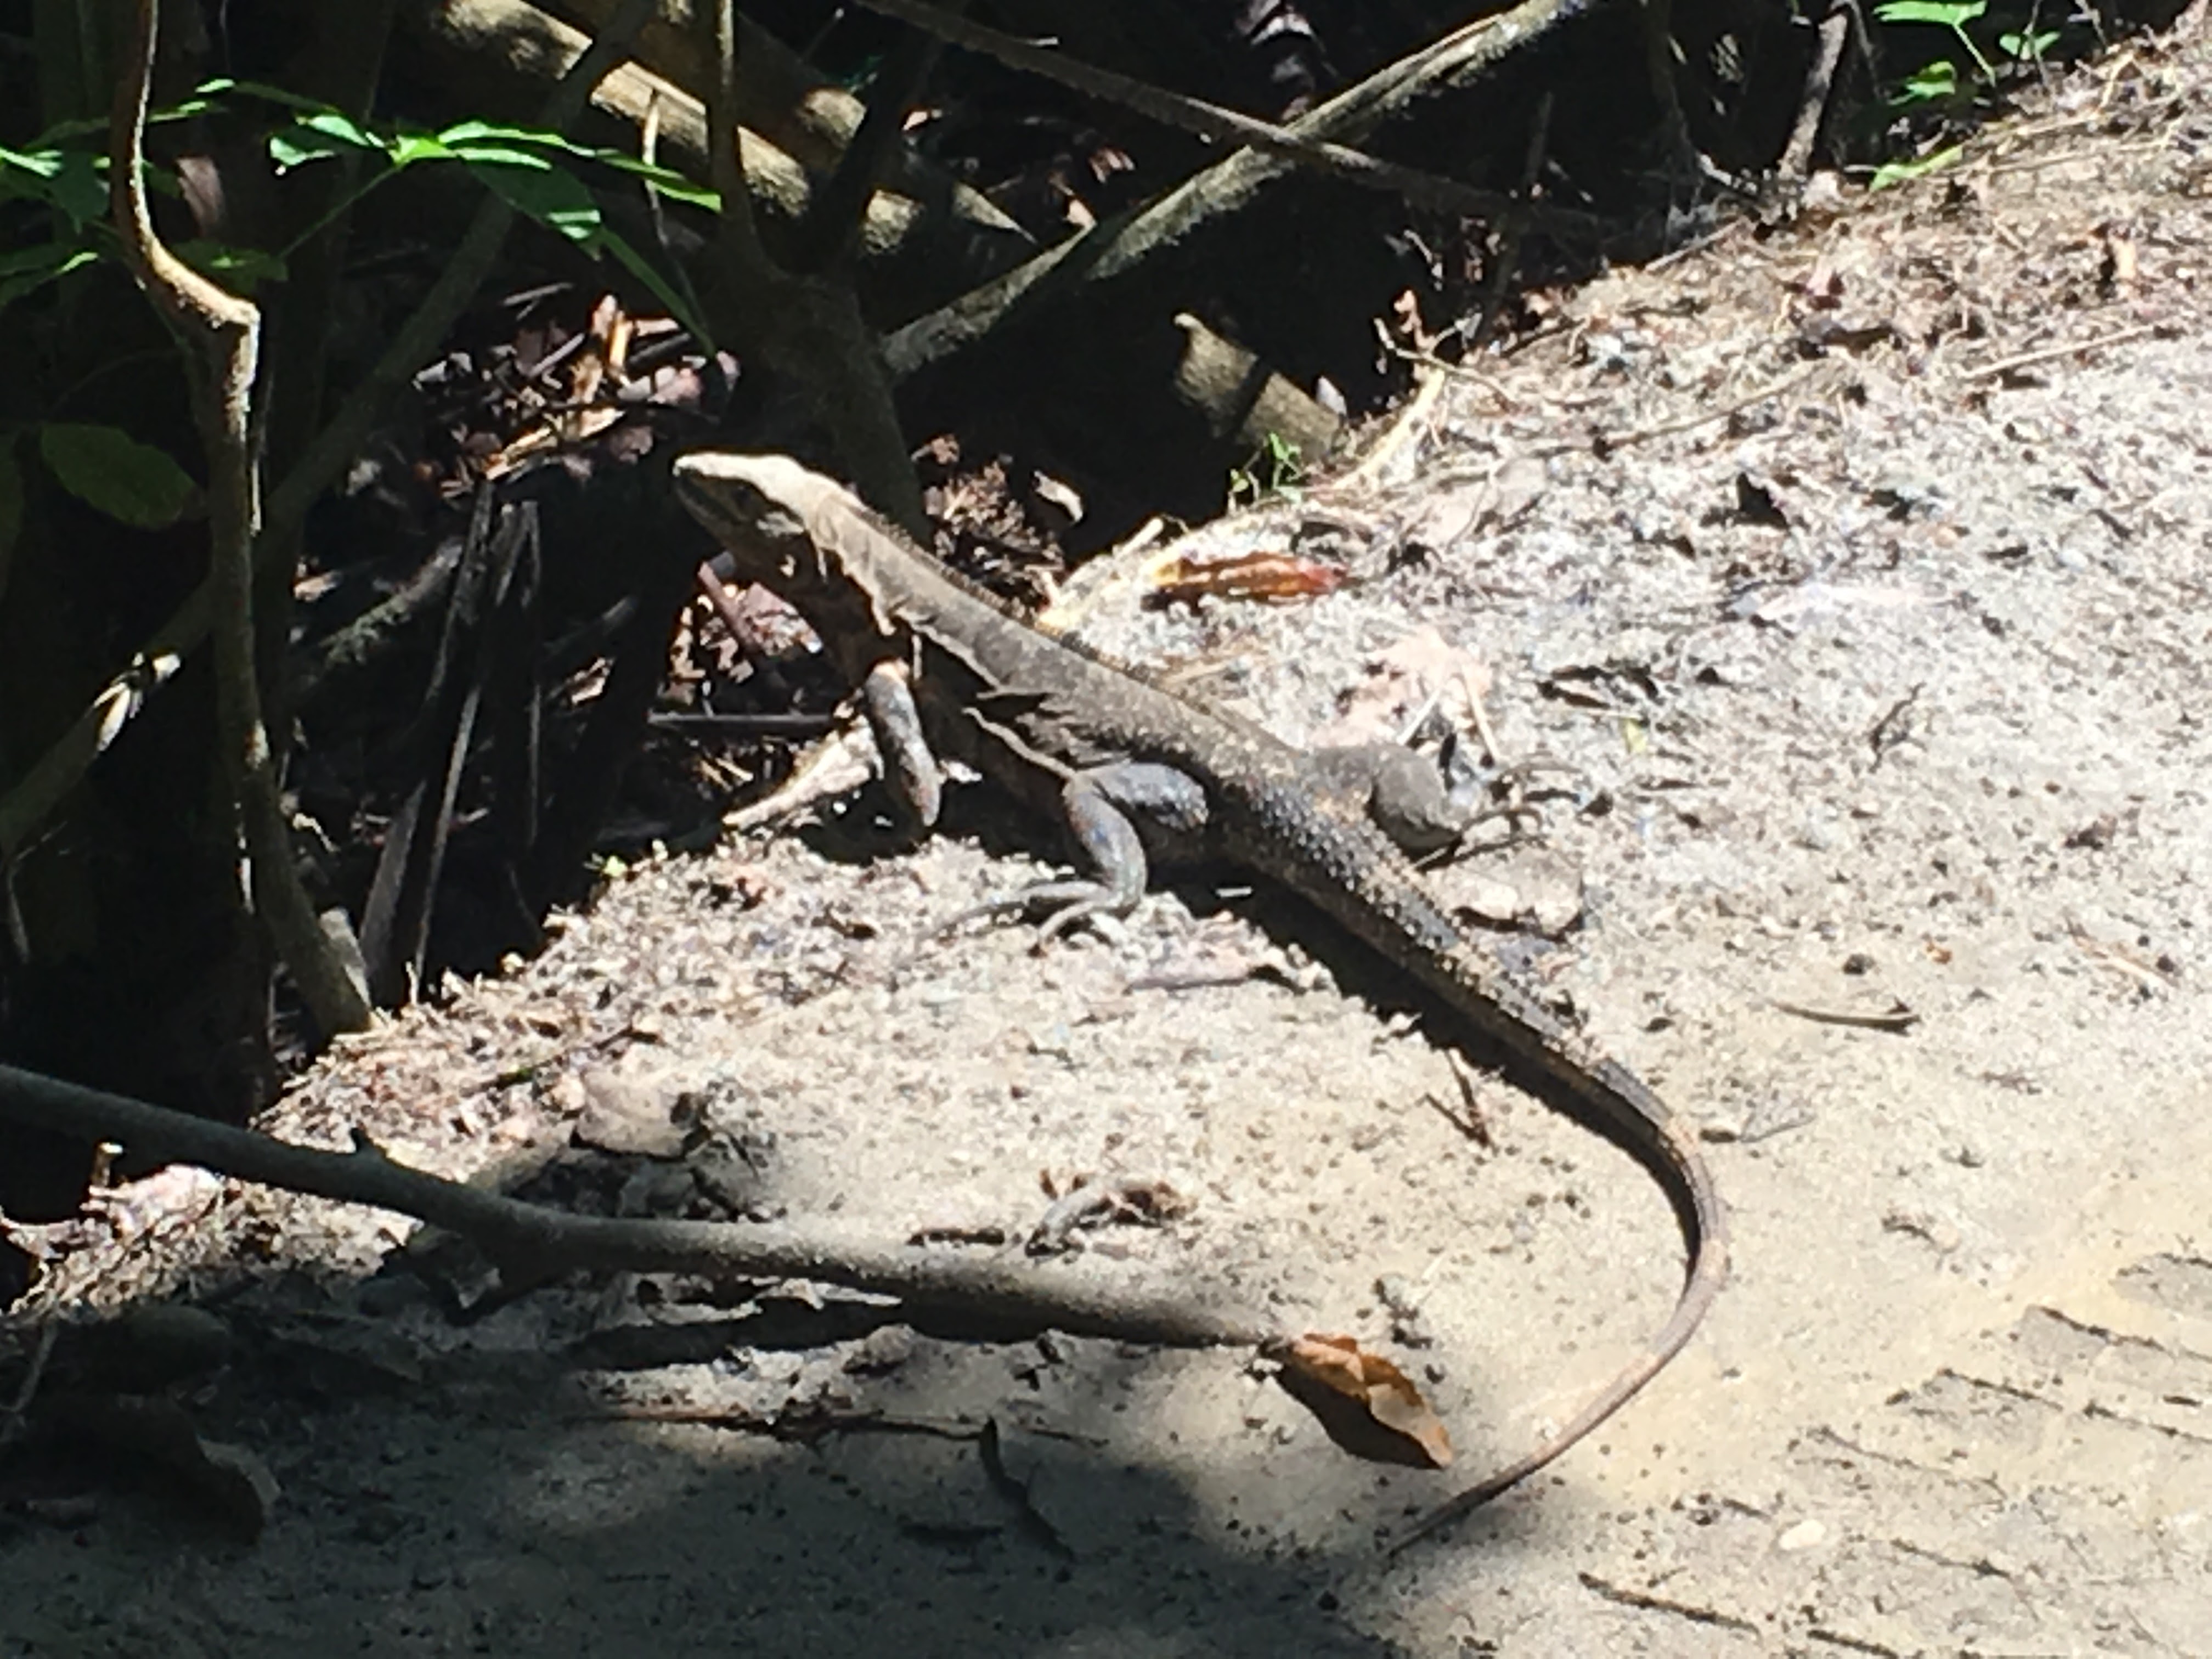 One of numerous lizards